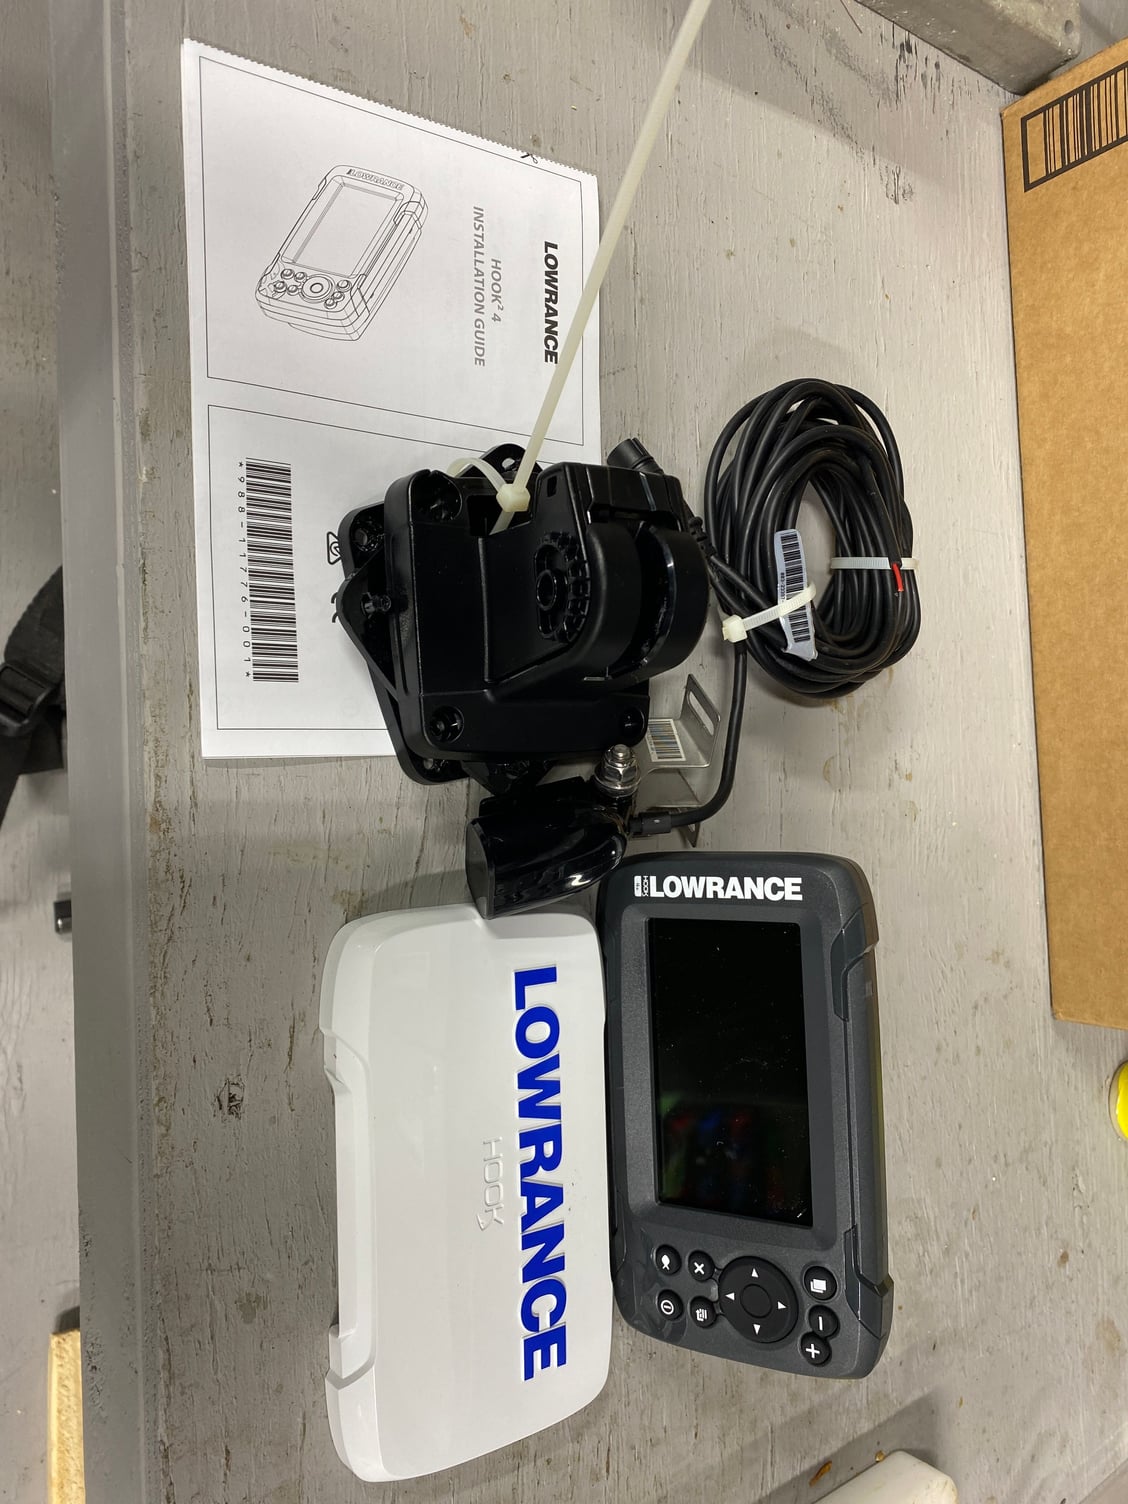 Lowrance Hook 2 Fish Finder for sale - The Hull Truth - Boating